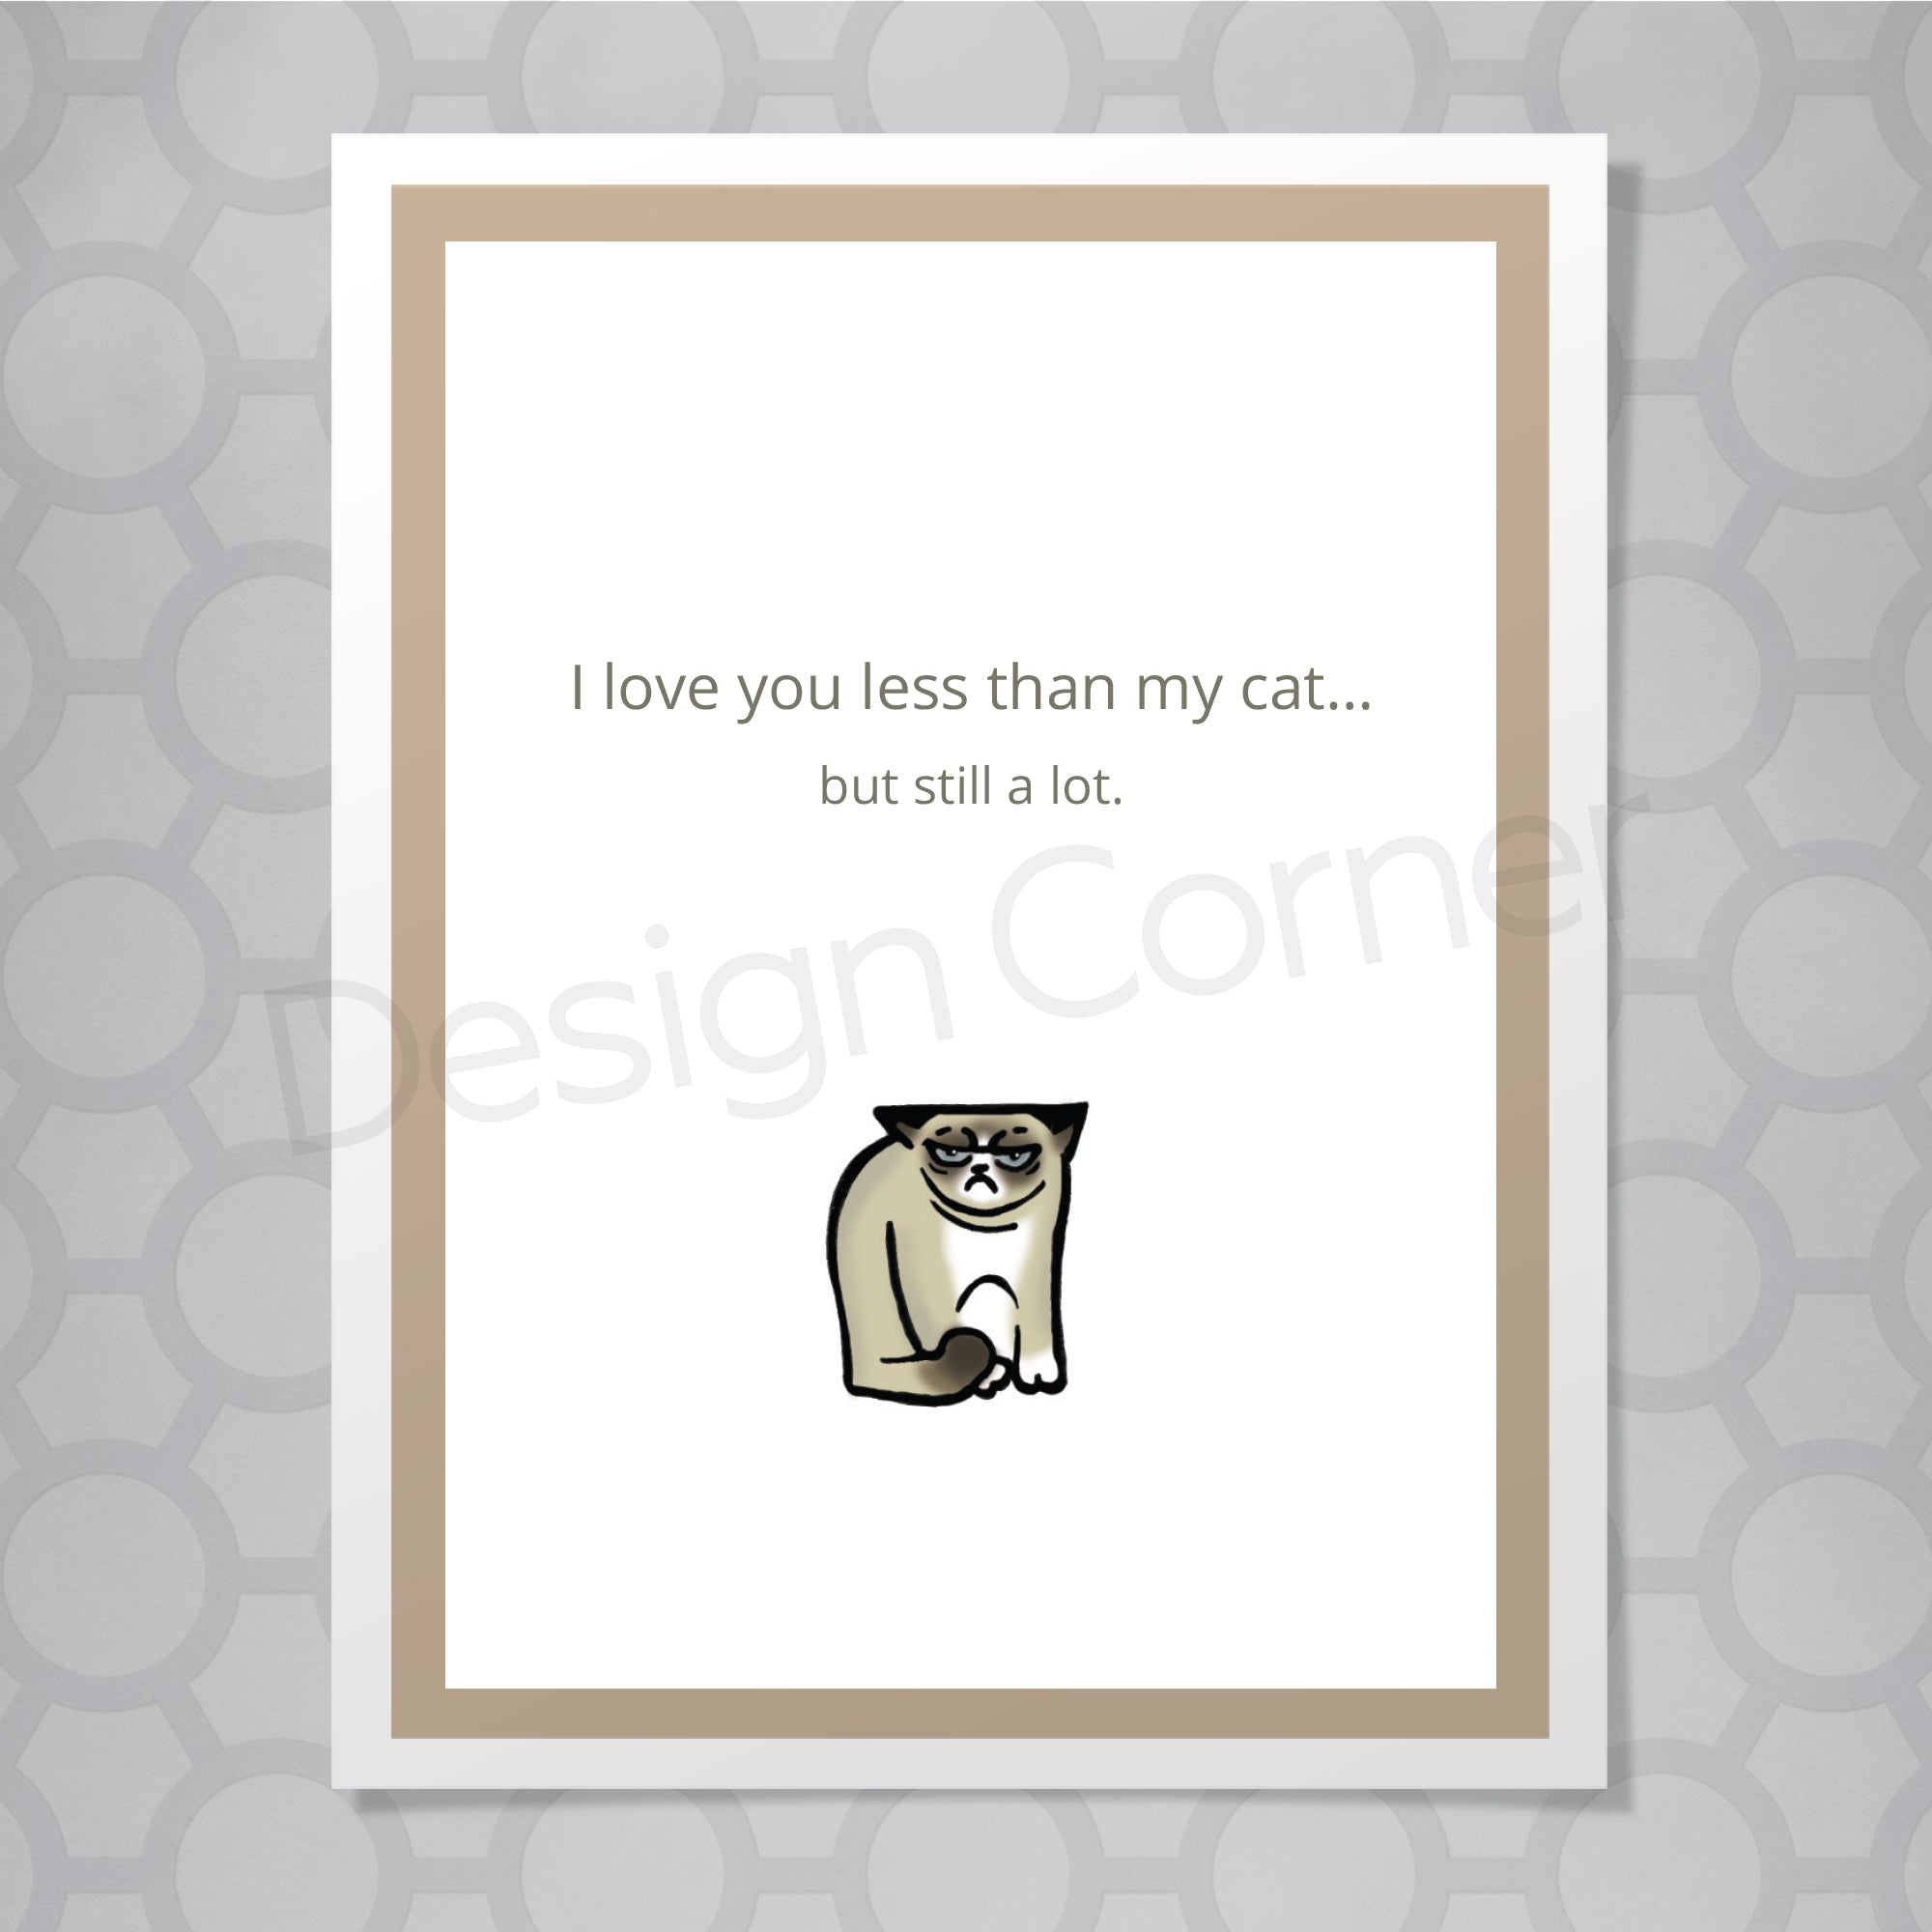 Illustration of cat on greeting card with caption "I love you less than my cat... but still a lot.